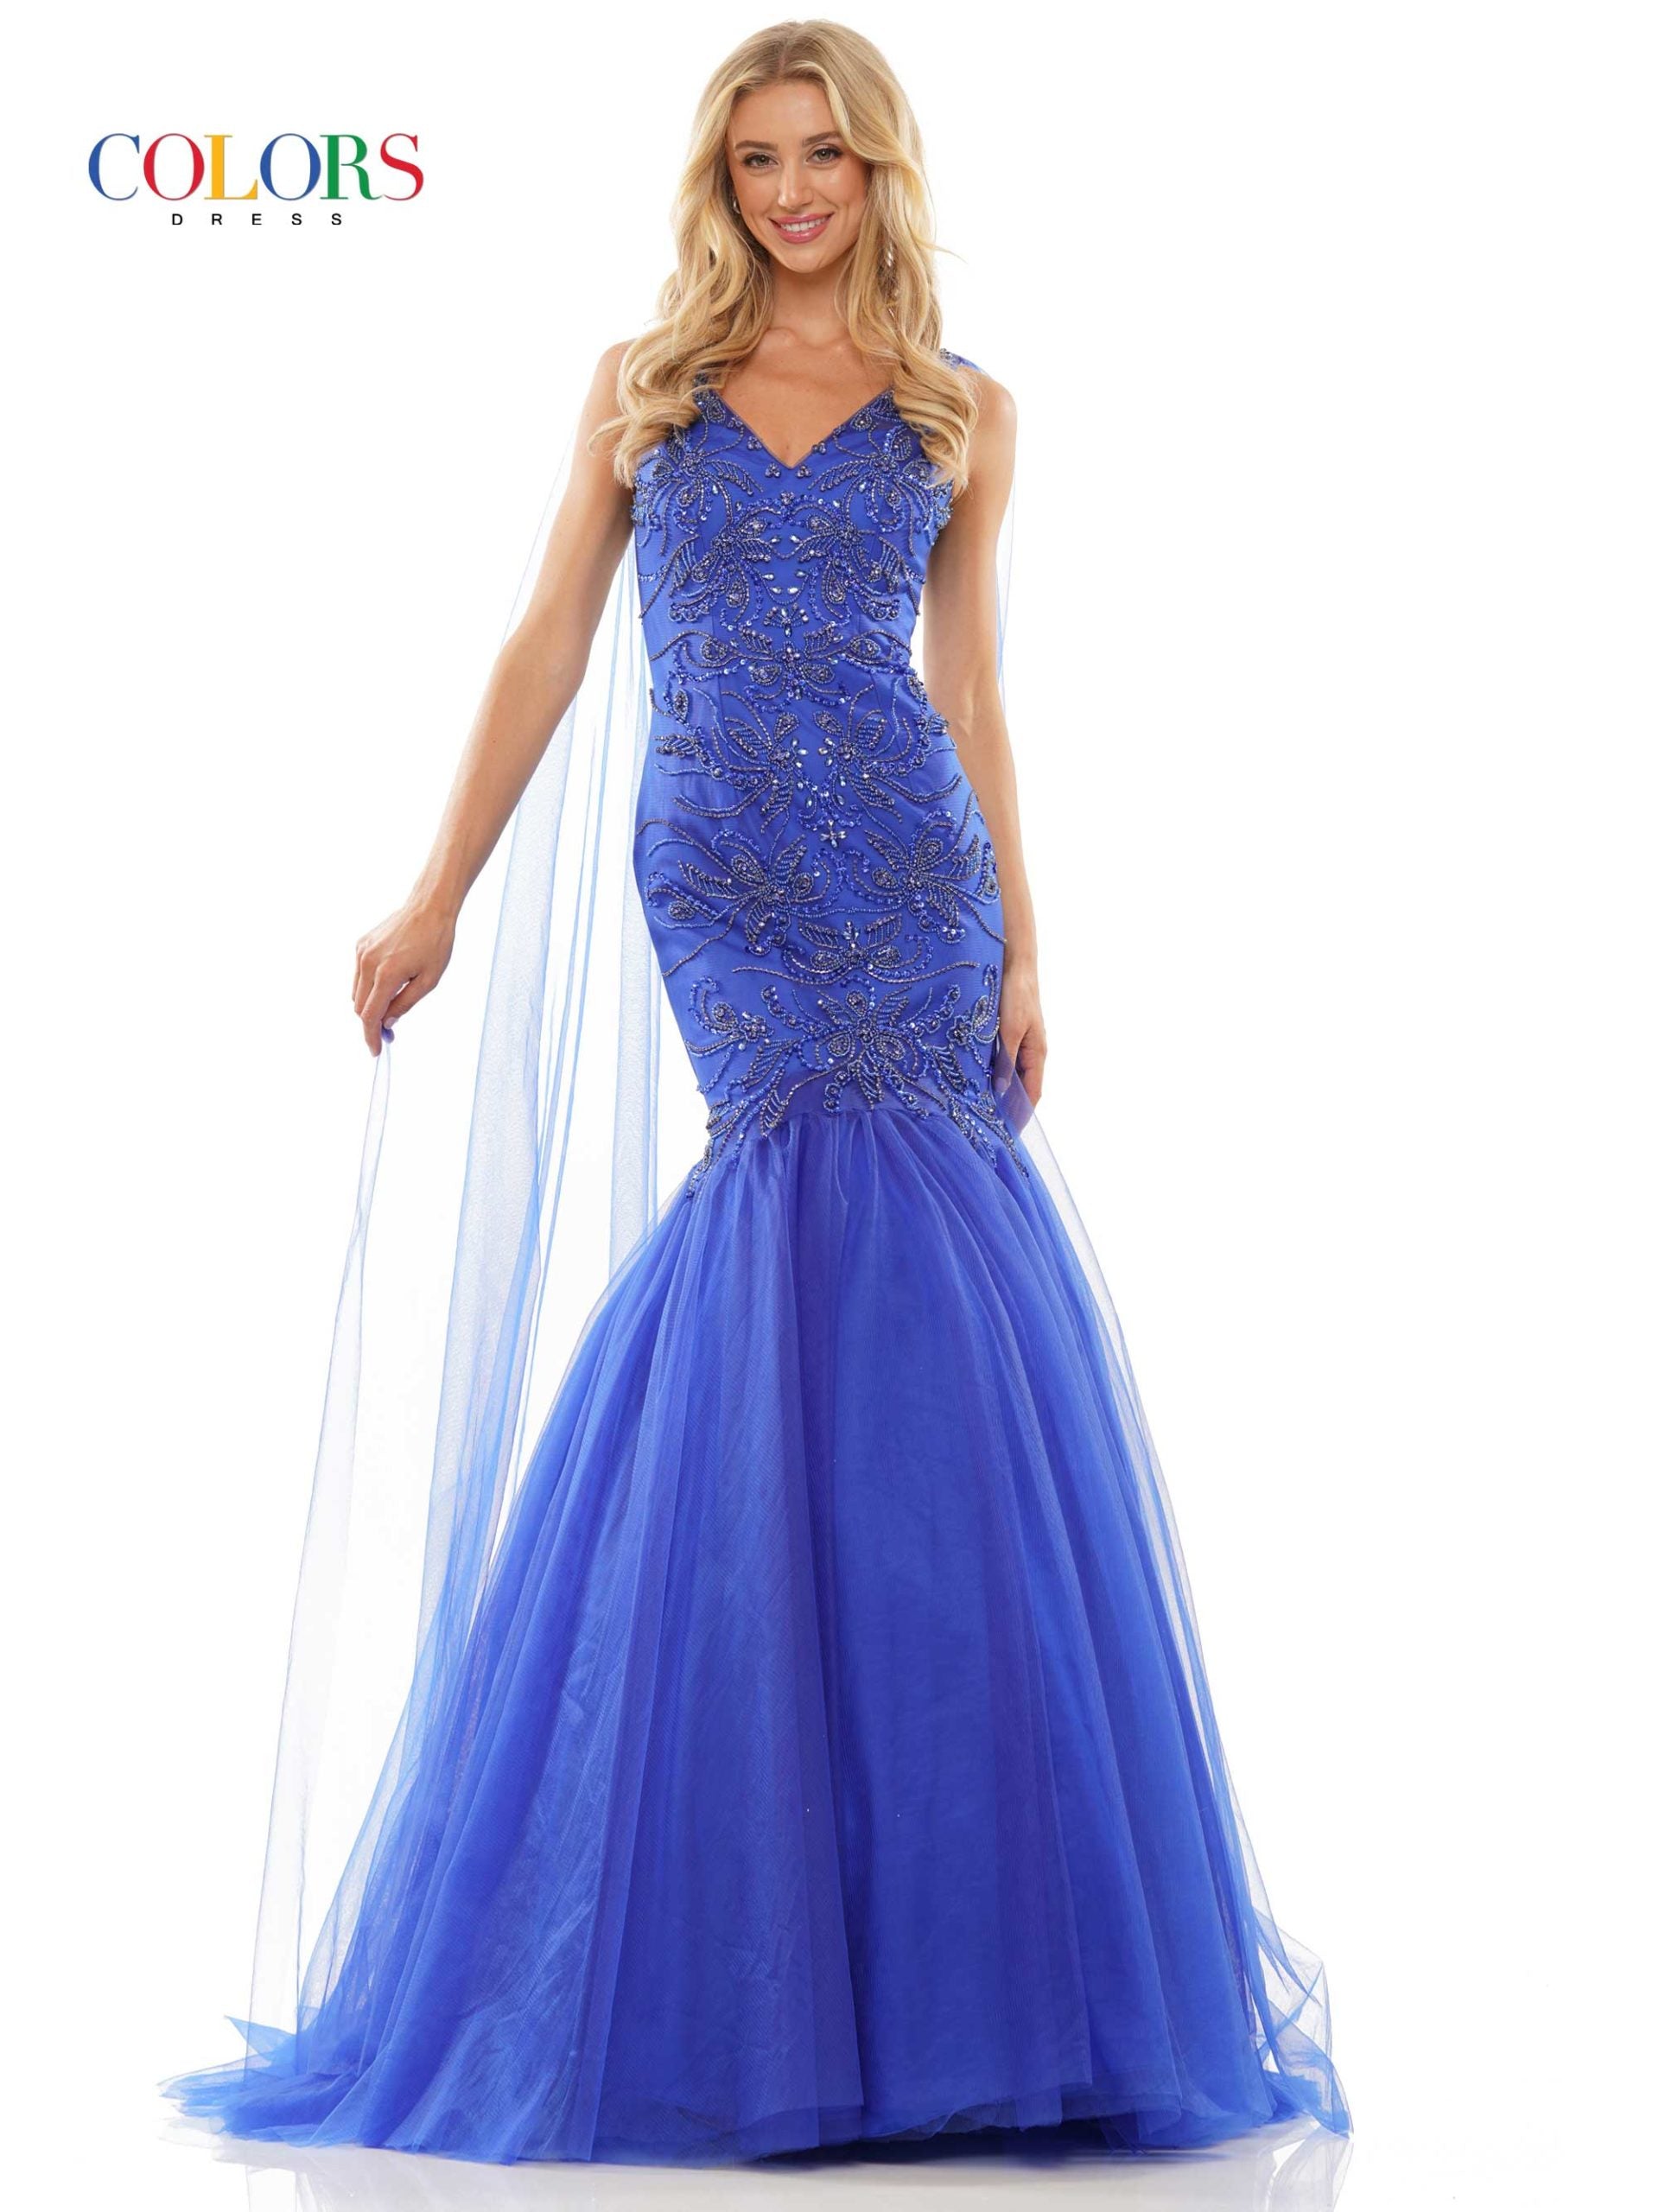 Colors Dress 2993 Mermaid Prom Dress with Capes 47"beaded mesh mermaid dress with V-neck, lace-up on back,  Royal blue